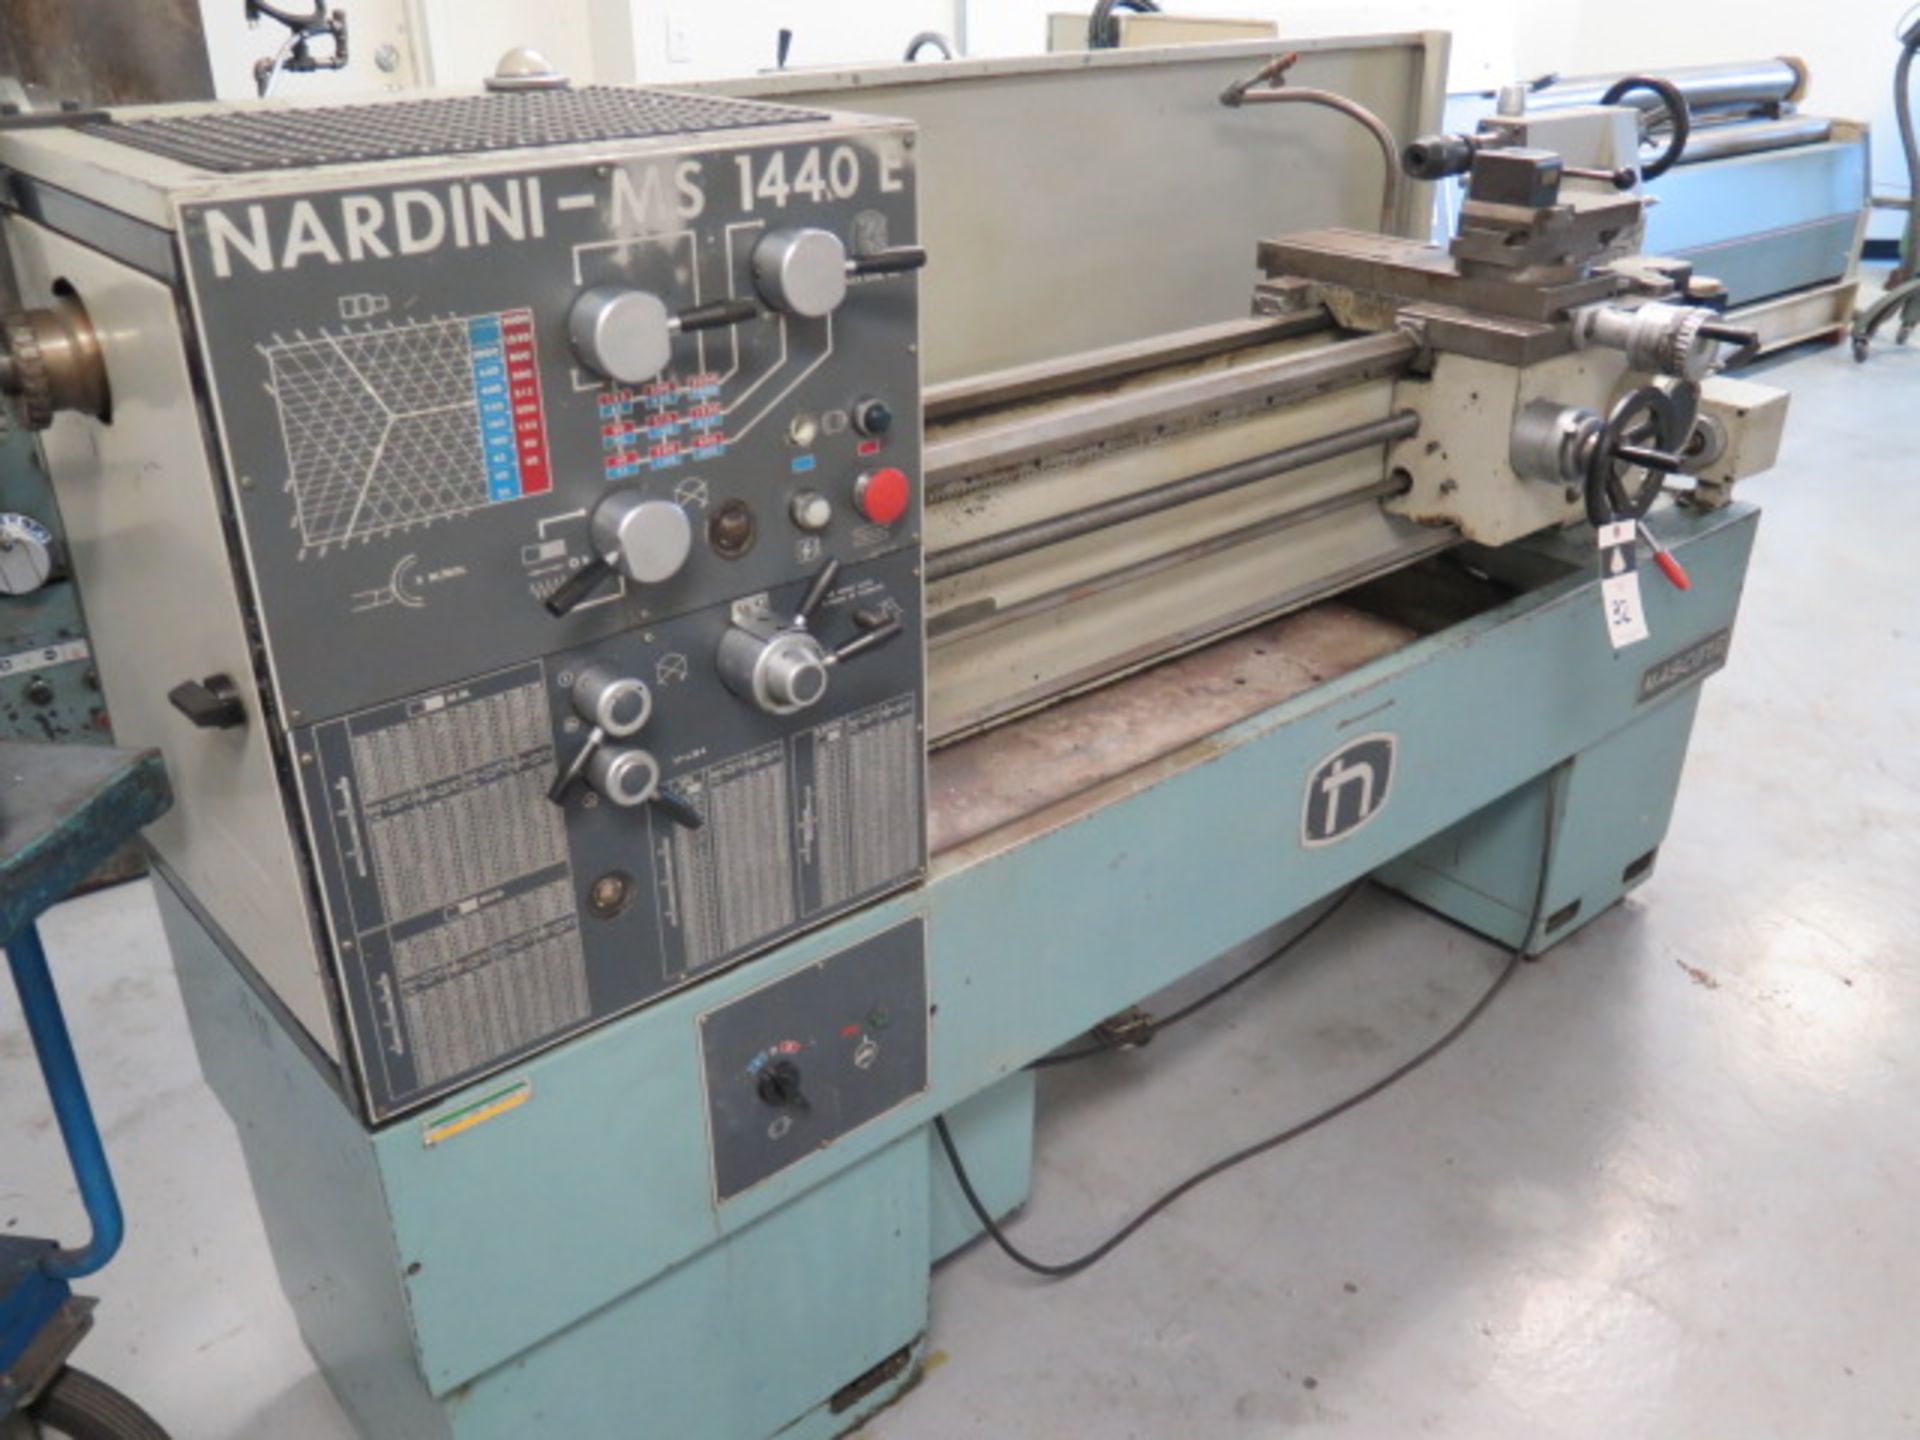 Nardini MS1440E “Mascote” 14” x 40” Geared Lathe w/ 25-2000 RPM,Inch/mm Thread, Tailstock,SOLD AS IS - Image 2 of 21